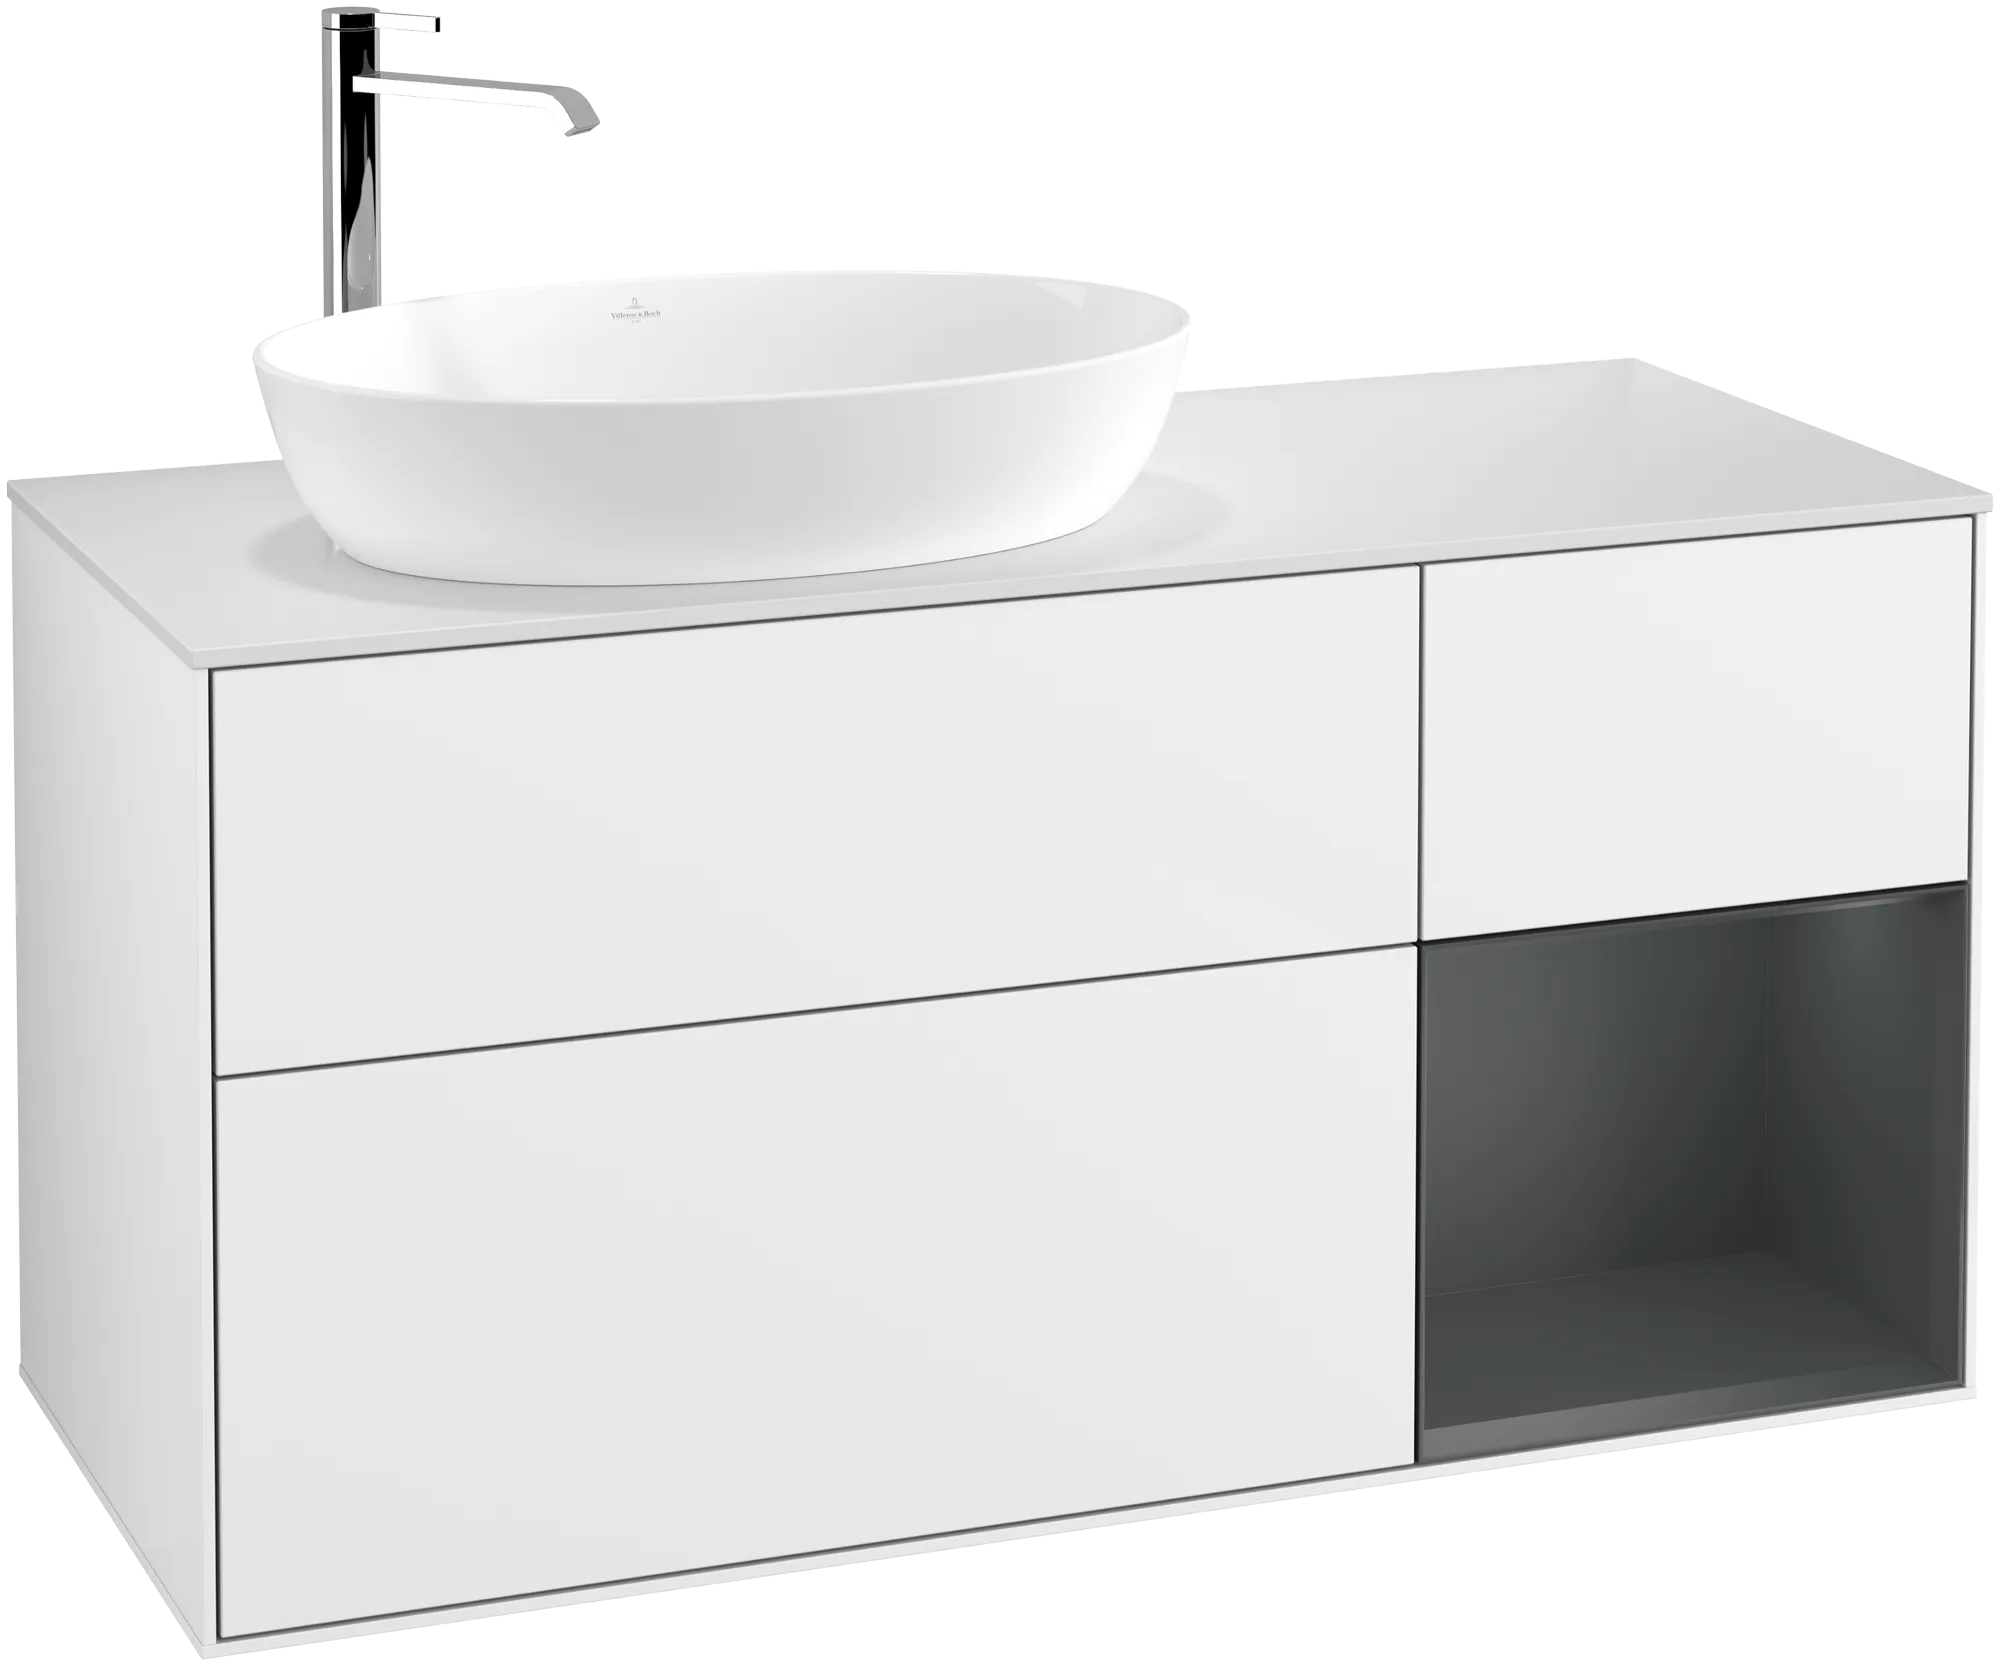 VILLEROY BOCH Finion Vanity unit, with lighting, 3 pull-out compartments, 1200 x 603 x 501 mm, Glossy White Lacquer / Midnight Blue Matt Lacquer / Glass White Matt #G931HGGF resmi